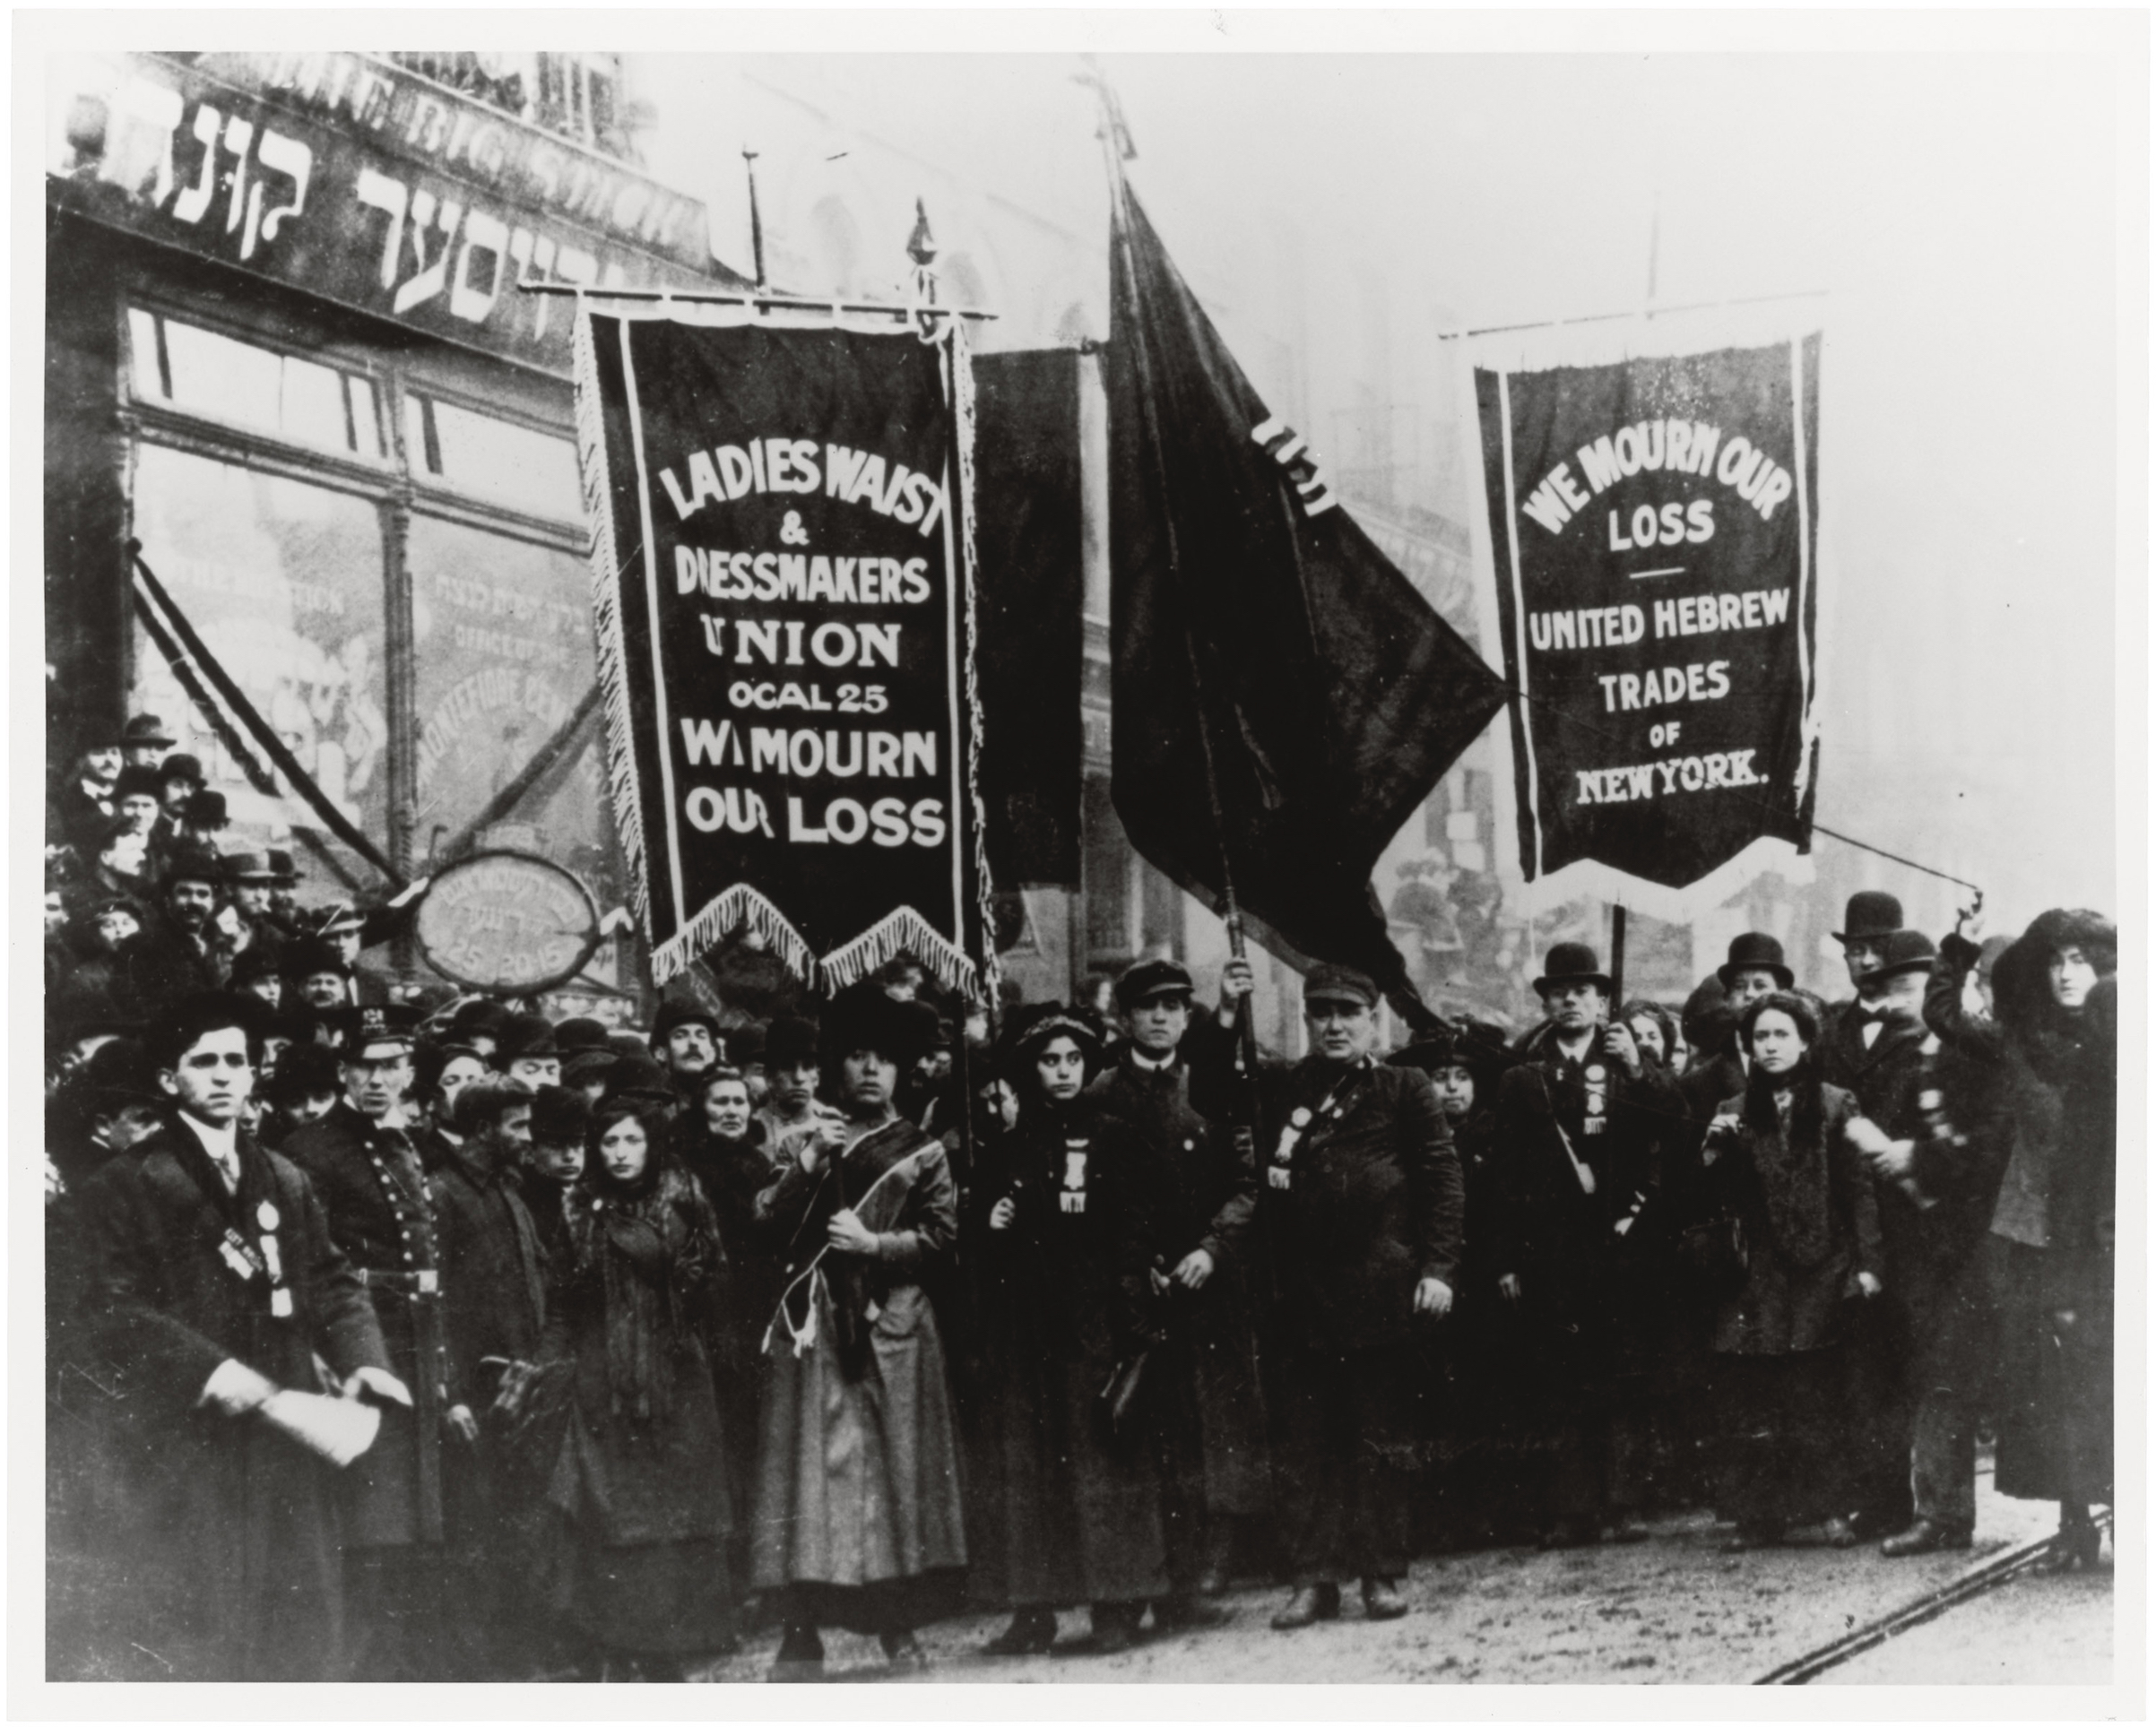 Demonstrators mourn for the deaths of victims of the Triangle Shirtwaist Factory fire, New York, New York, 1911. (Photo by PhotoQuest/Getty Images) (Getty Images)